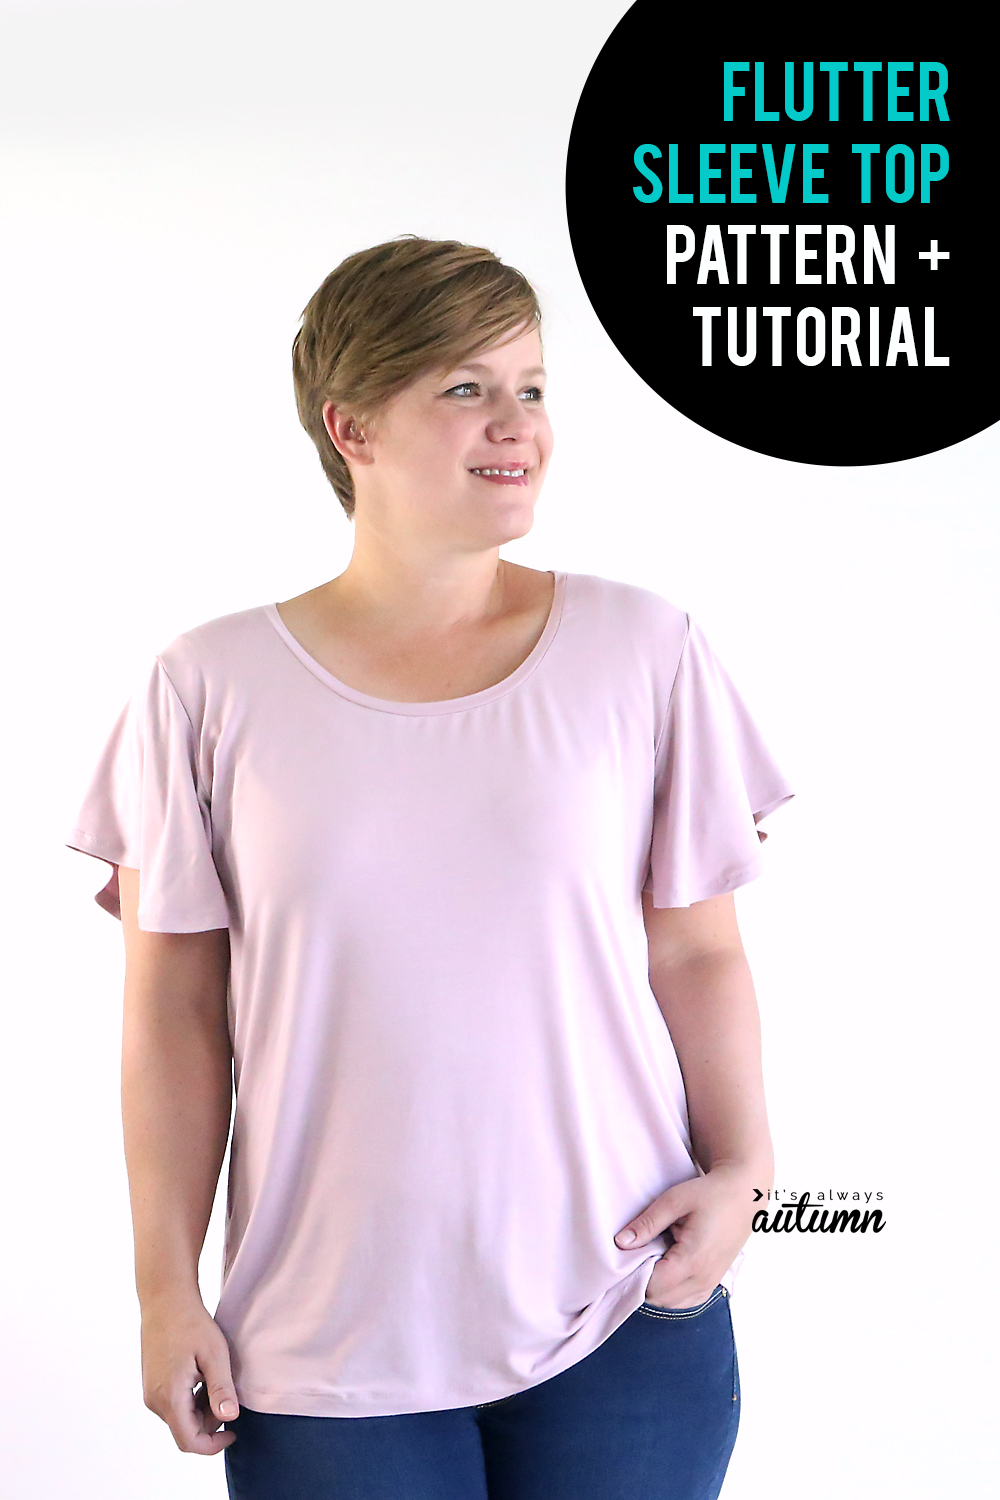 Click through to download the sewing pattern for this cute women's top with flutter sleeves.